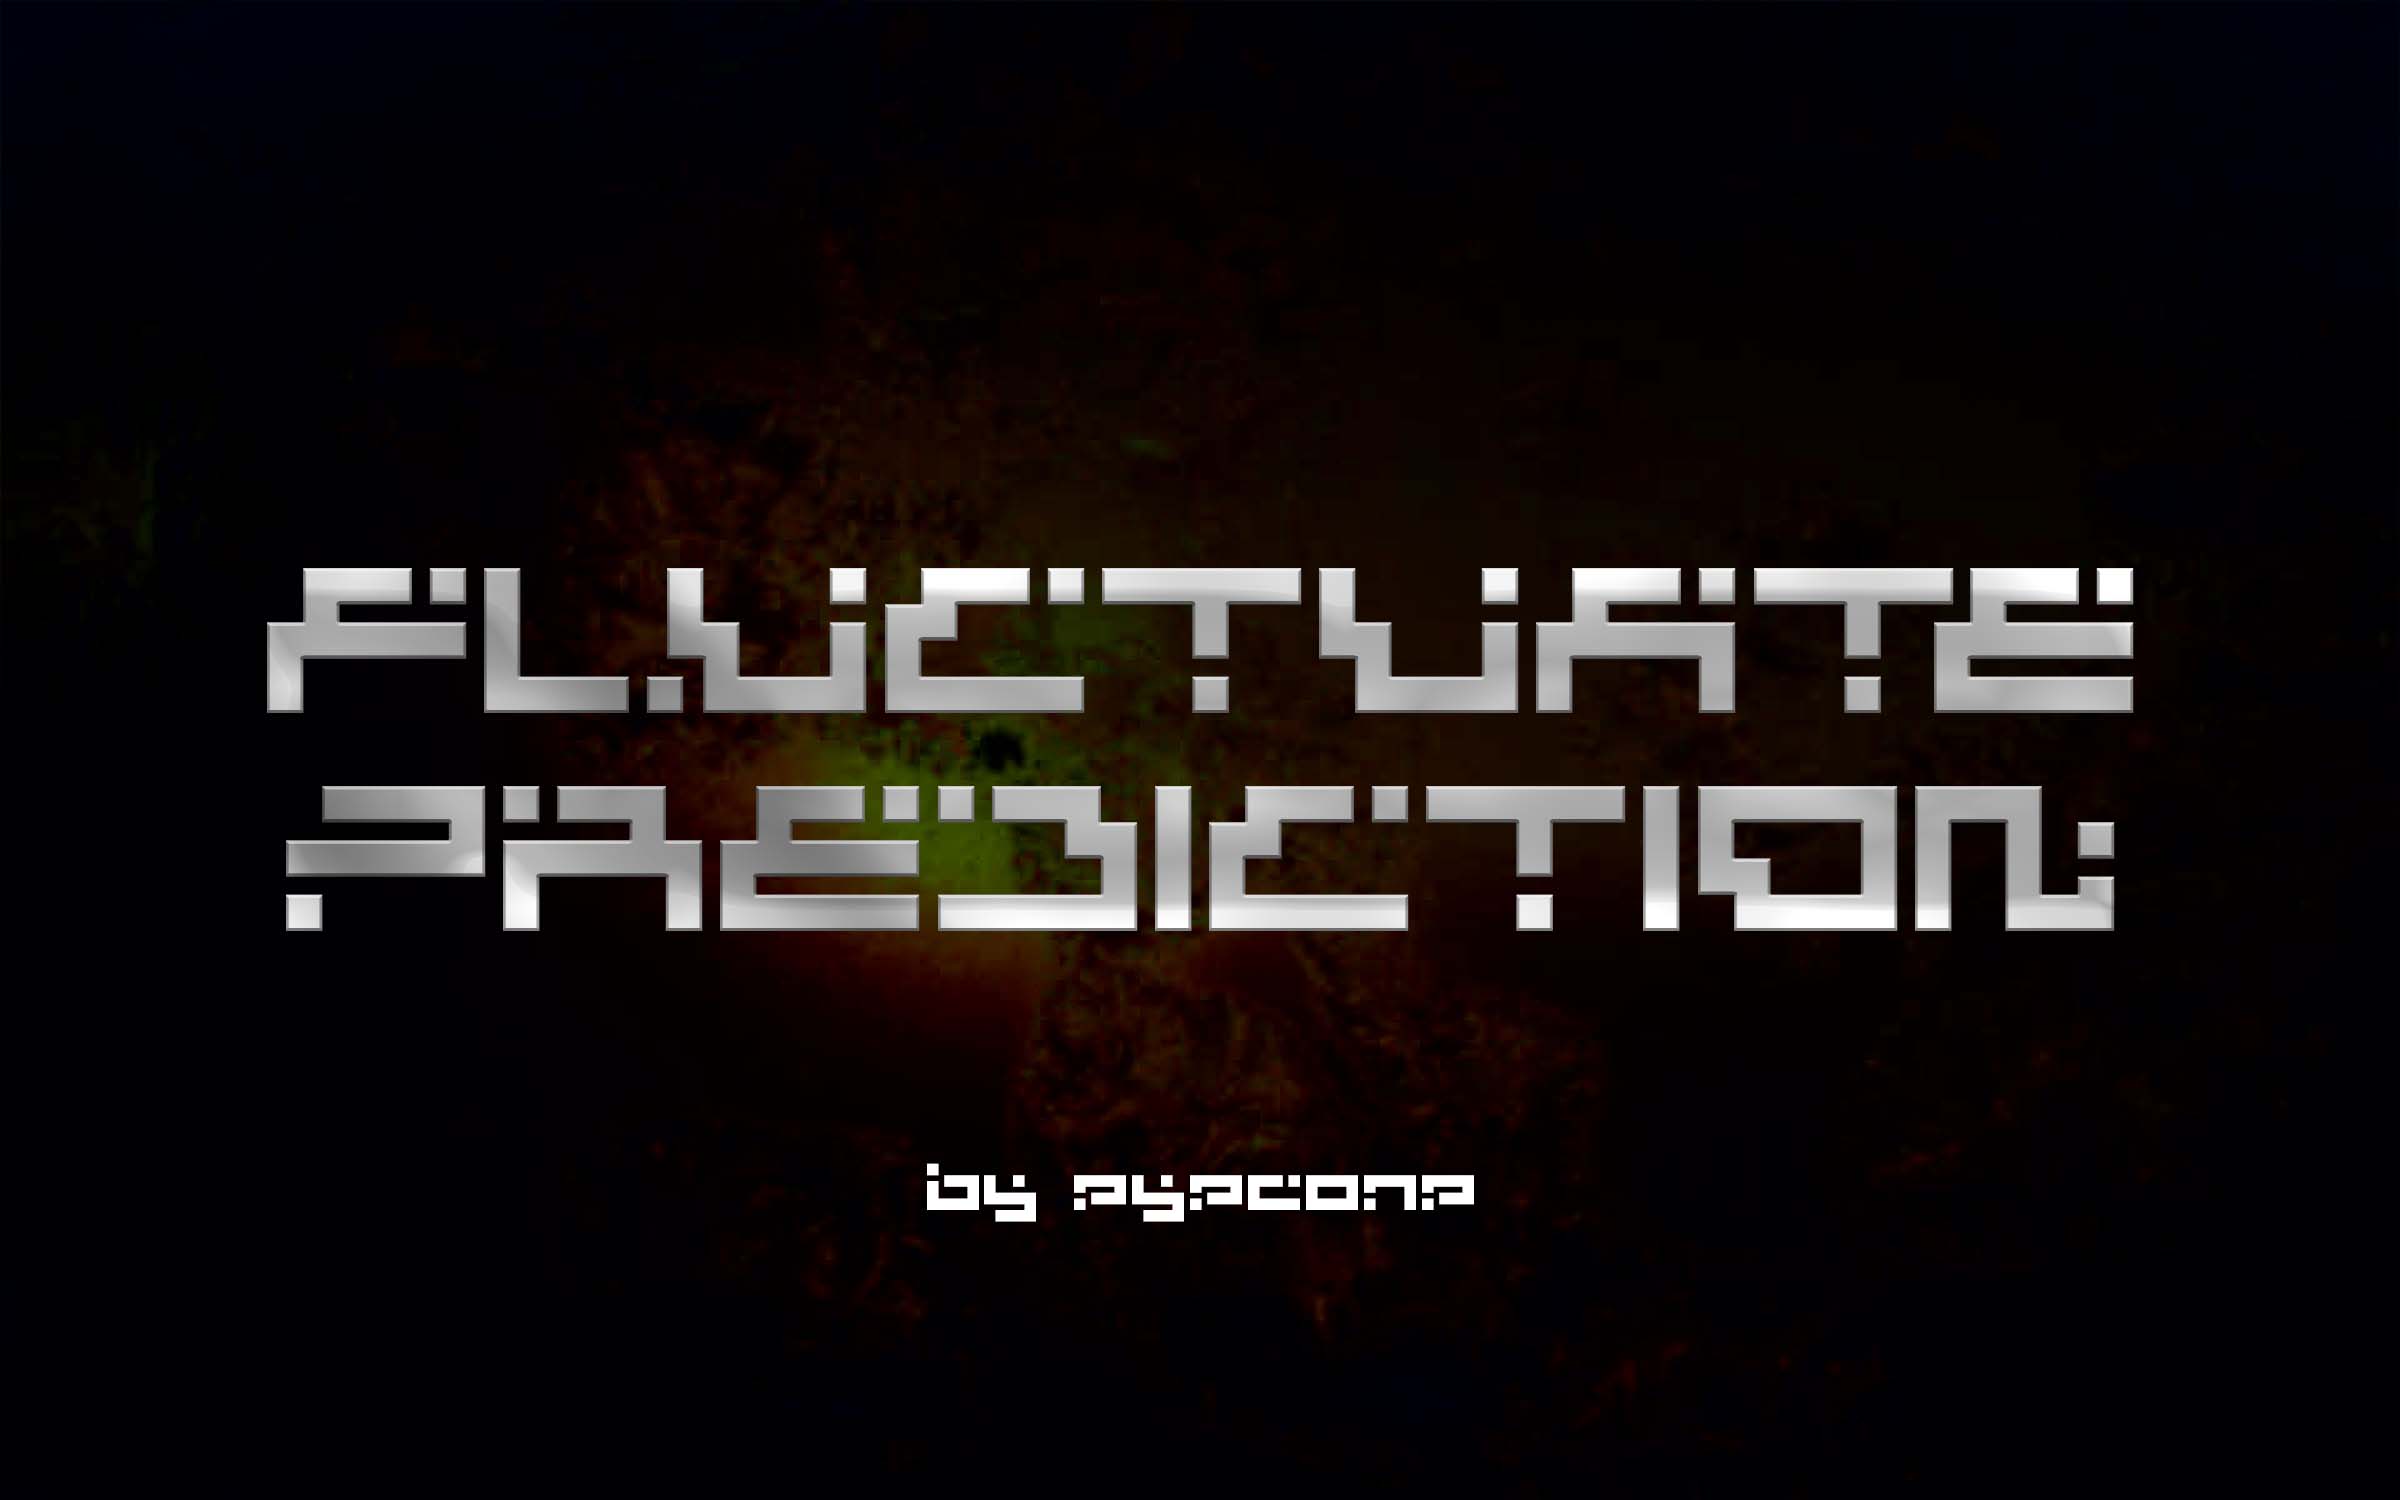 Fluctuate Prediction